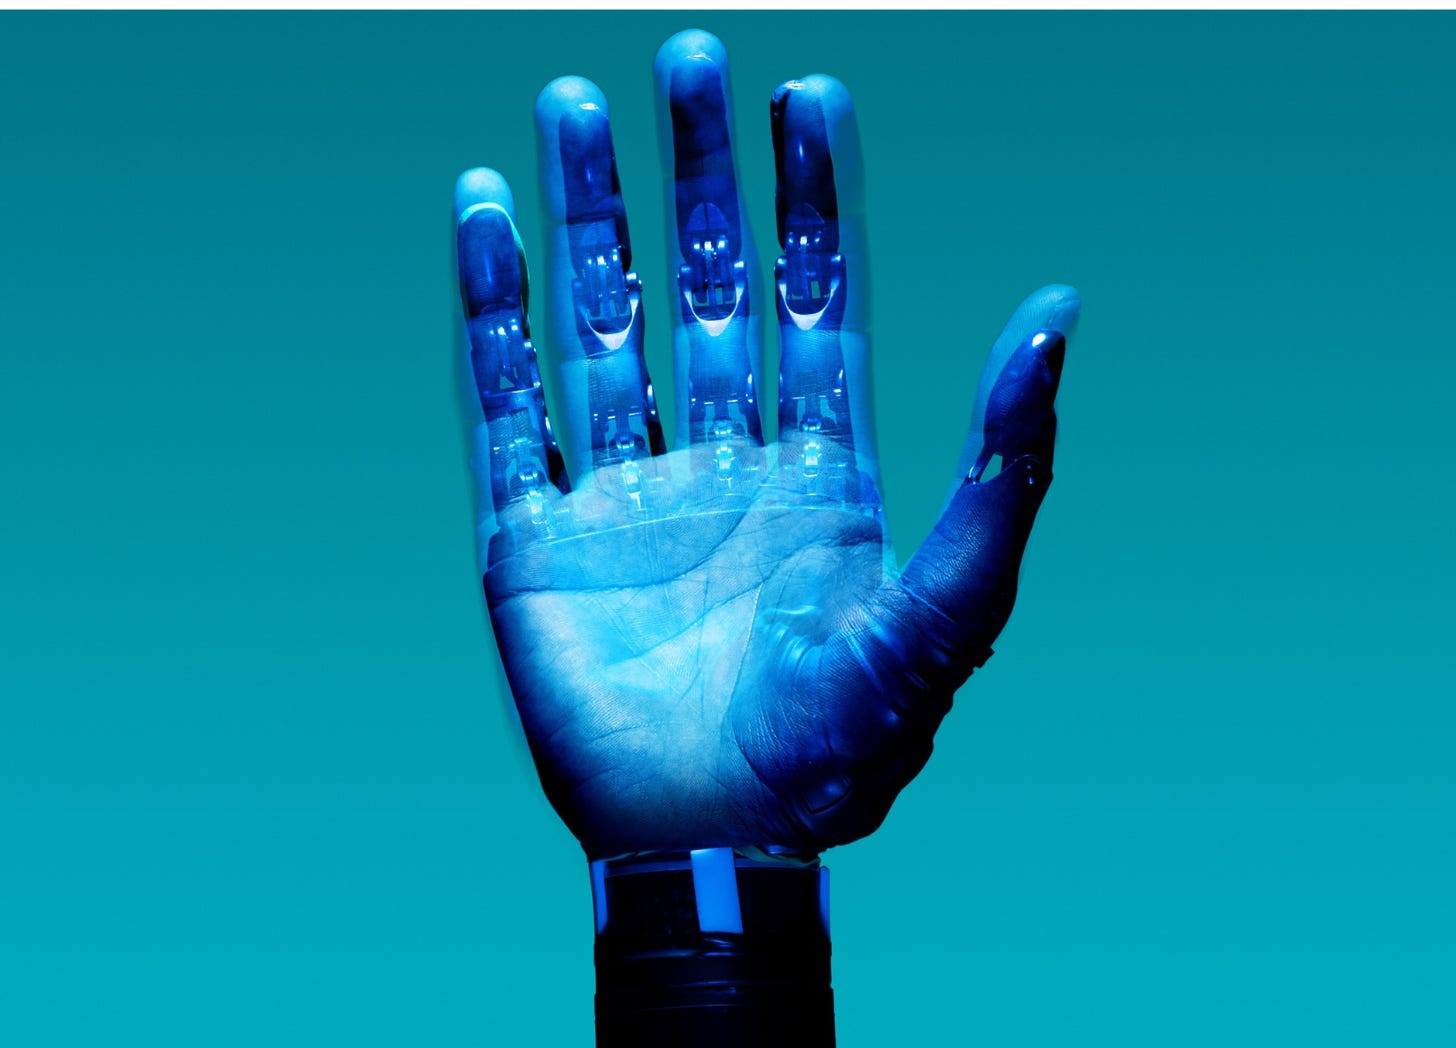 The image is a visualisation of a prosthetic arm made by the Royal Academy of Engineering